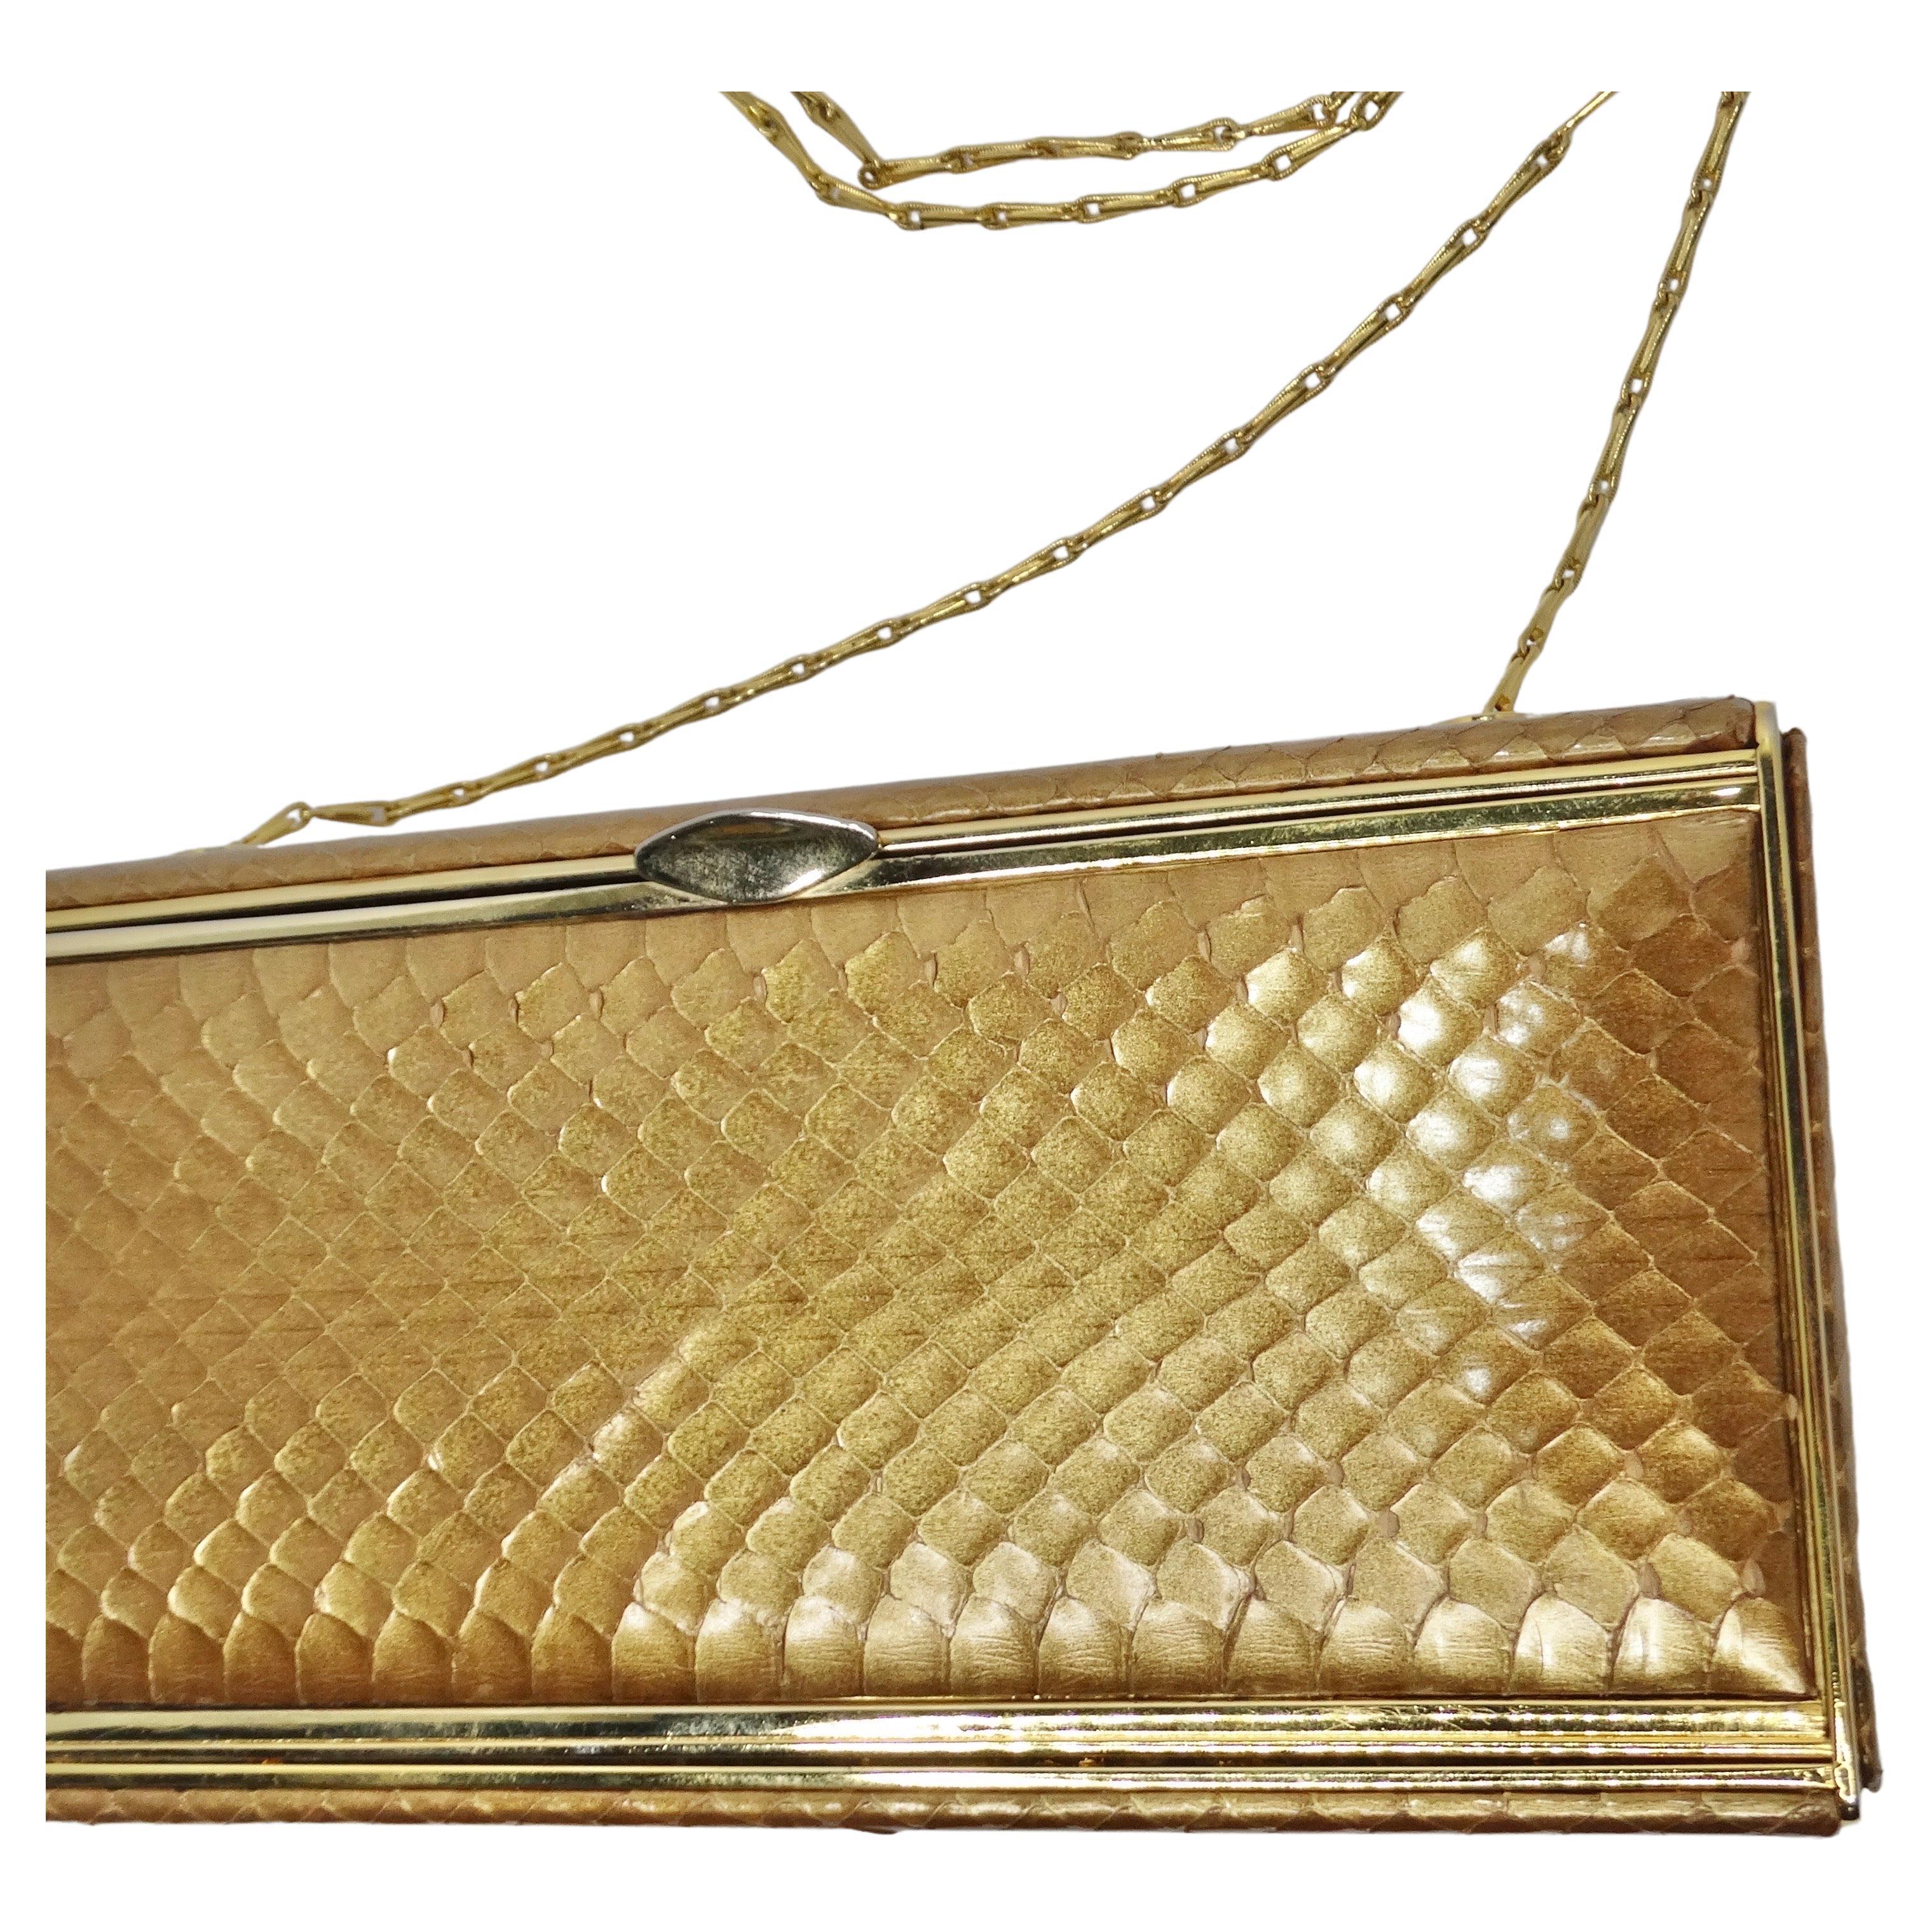 Judith Leiber Crossbody Gold Tone Clutch In Excellent Condition For Sale In Scottsdale, AZ